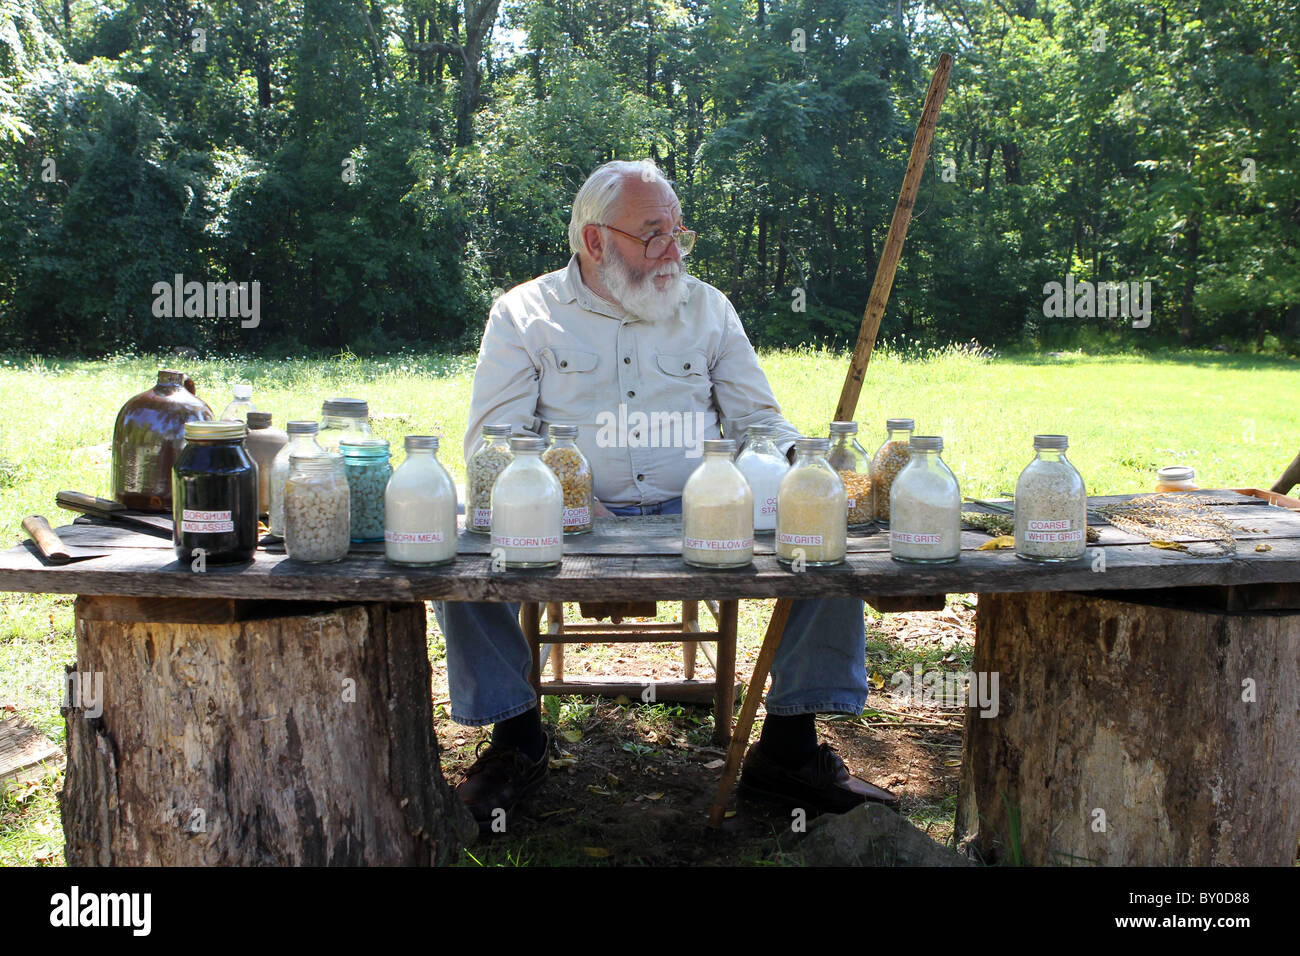 A CivIl War reenactor shows his wares and explains history to passersby in Albemarle County, Virginia. Stock Photo